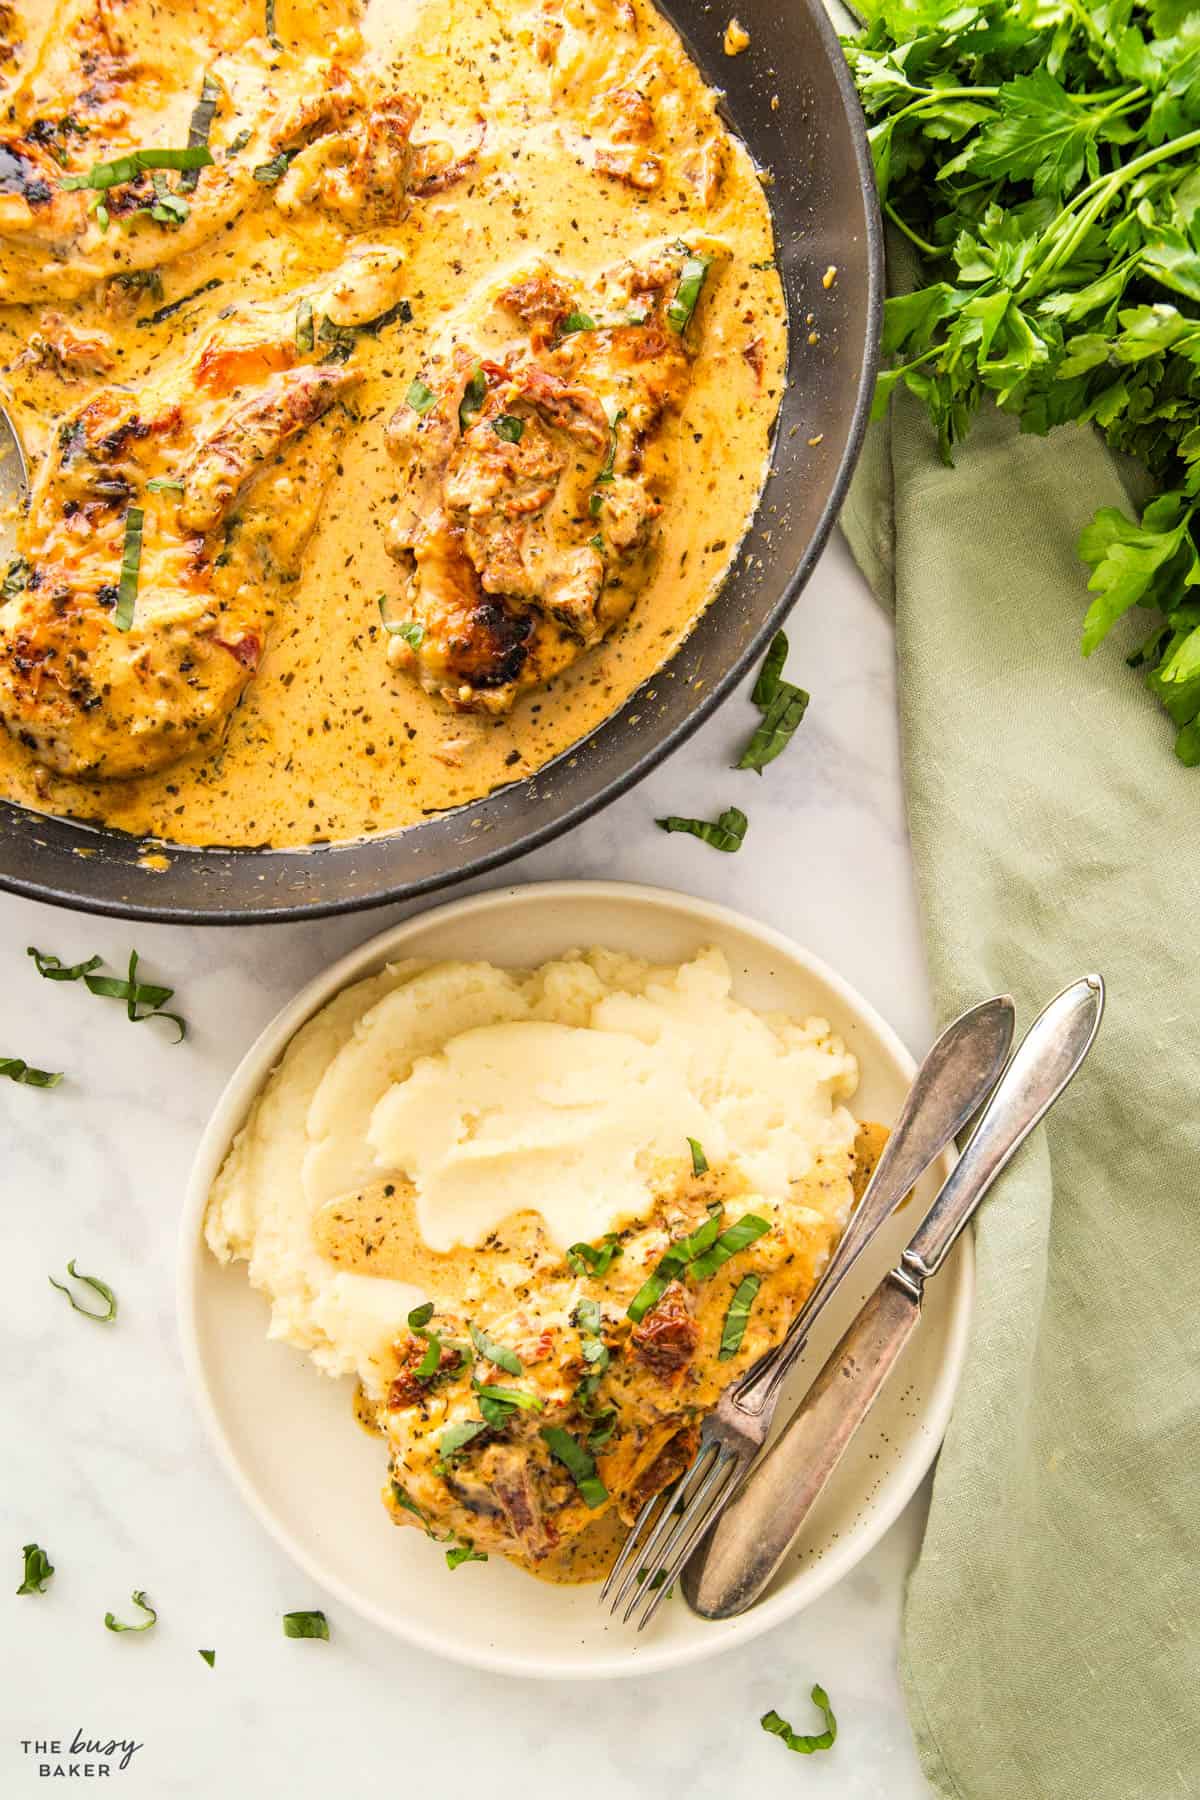 creamy chicken with a sun-dried tomato sauce and mashed potatoes